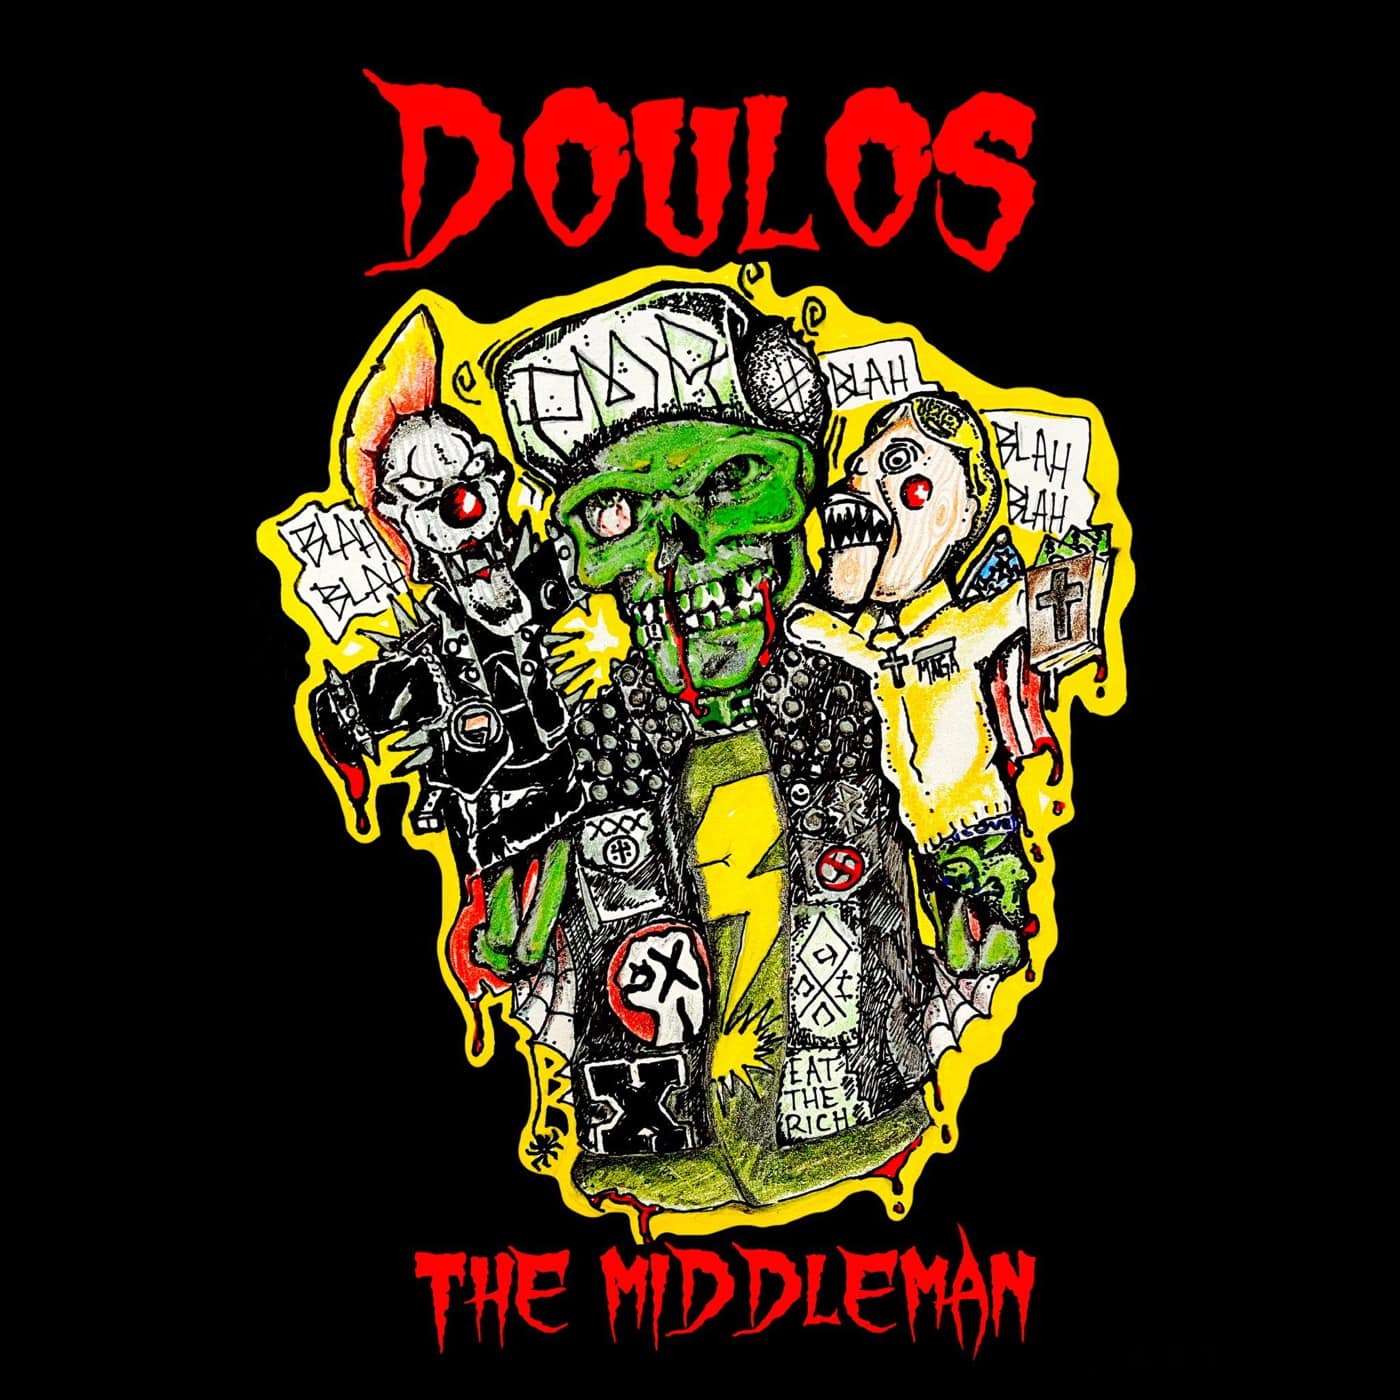 Doulos - The Middleman ALBUM COVER